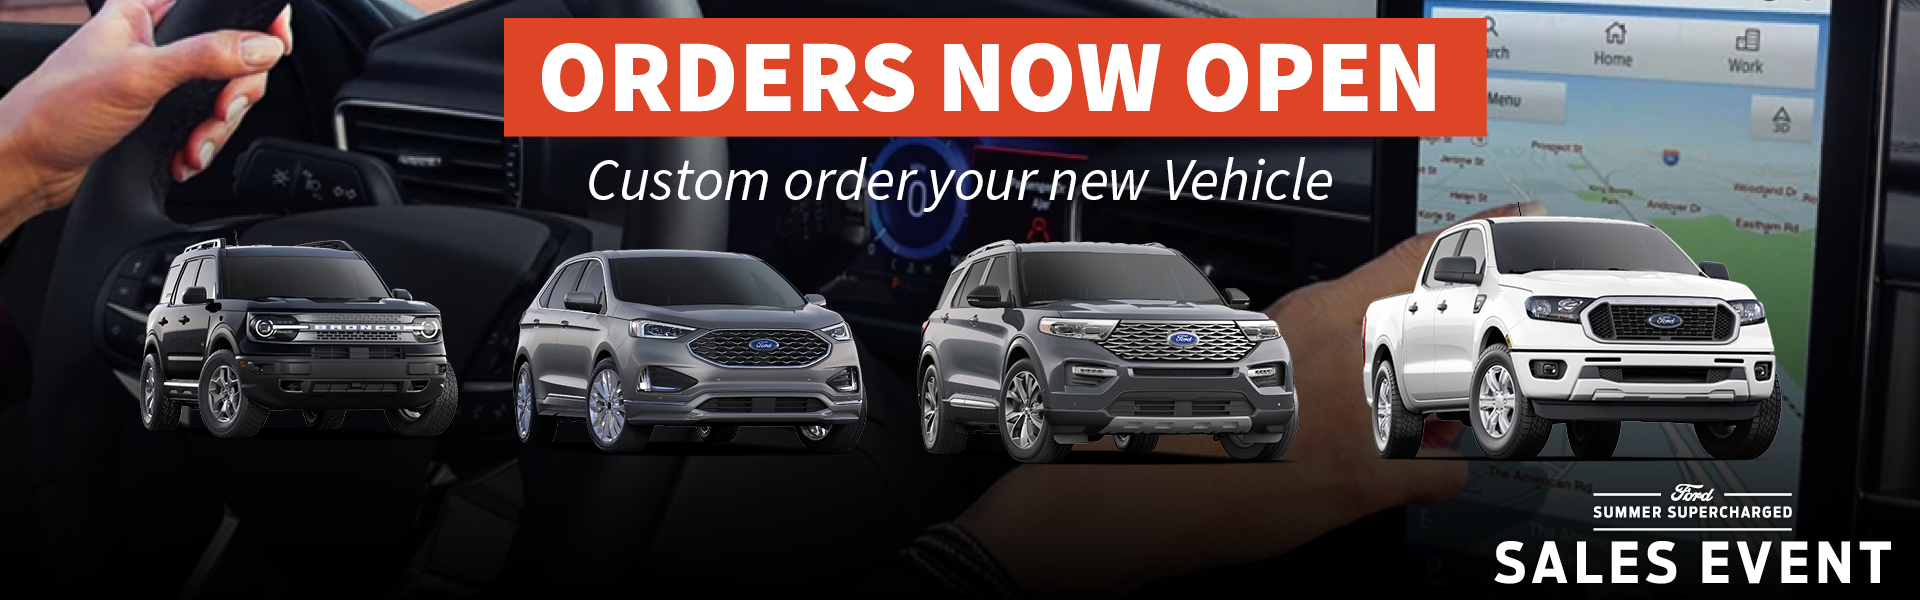 Graphic with text "Order's Now Open! Order Your New Vehicle Now!